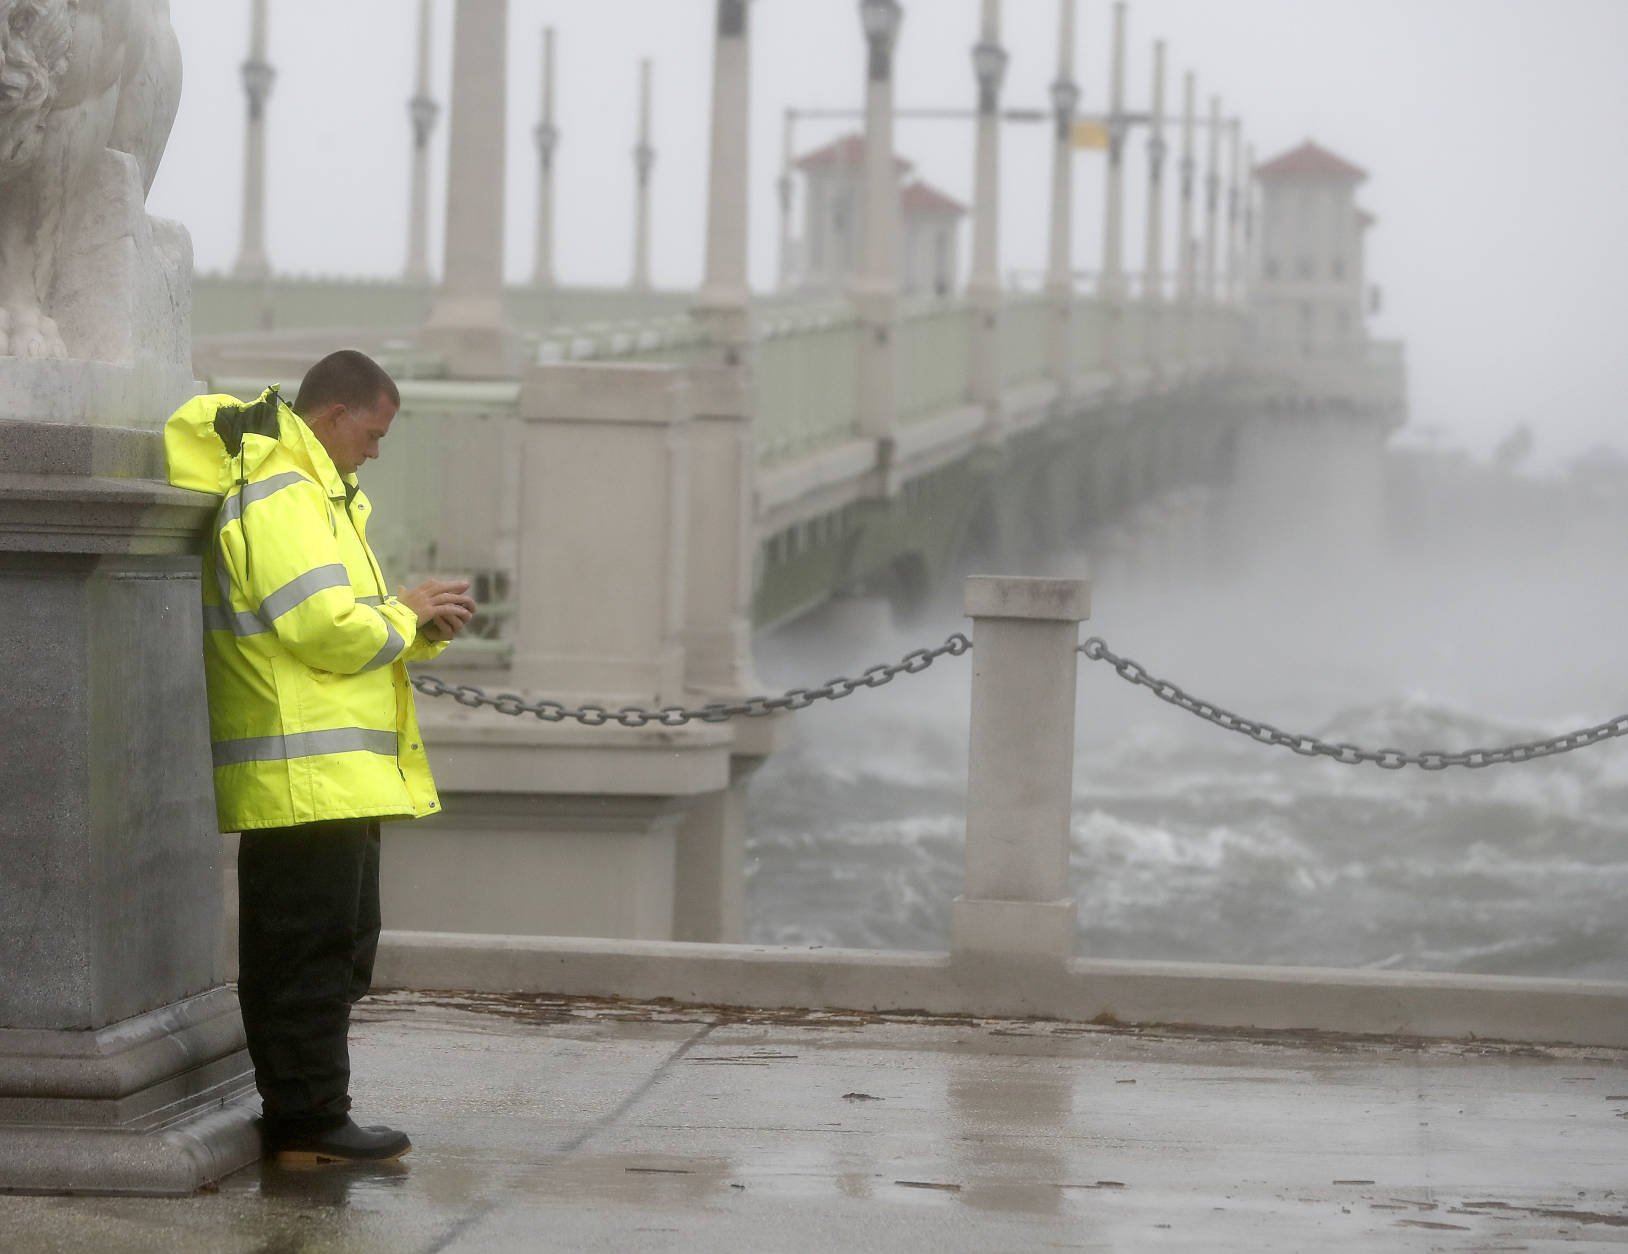 A police officer tries to shield himself from winds from Hurricane Matthew behind statue as he checks his cell phone Friday, Oct. 7, 2016, in St. Augustine , Fla.  Matthew was downgraded to a Category 3 hurricane overnight, and its storm center hung just offshore as it moved up the Florida coastline, sparing communities its full 120 mph winds.   (AP Photo/John Bazemore)